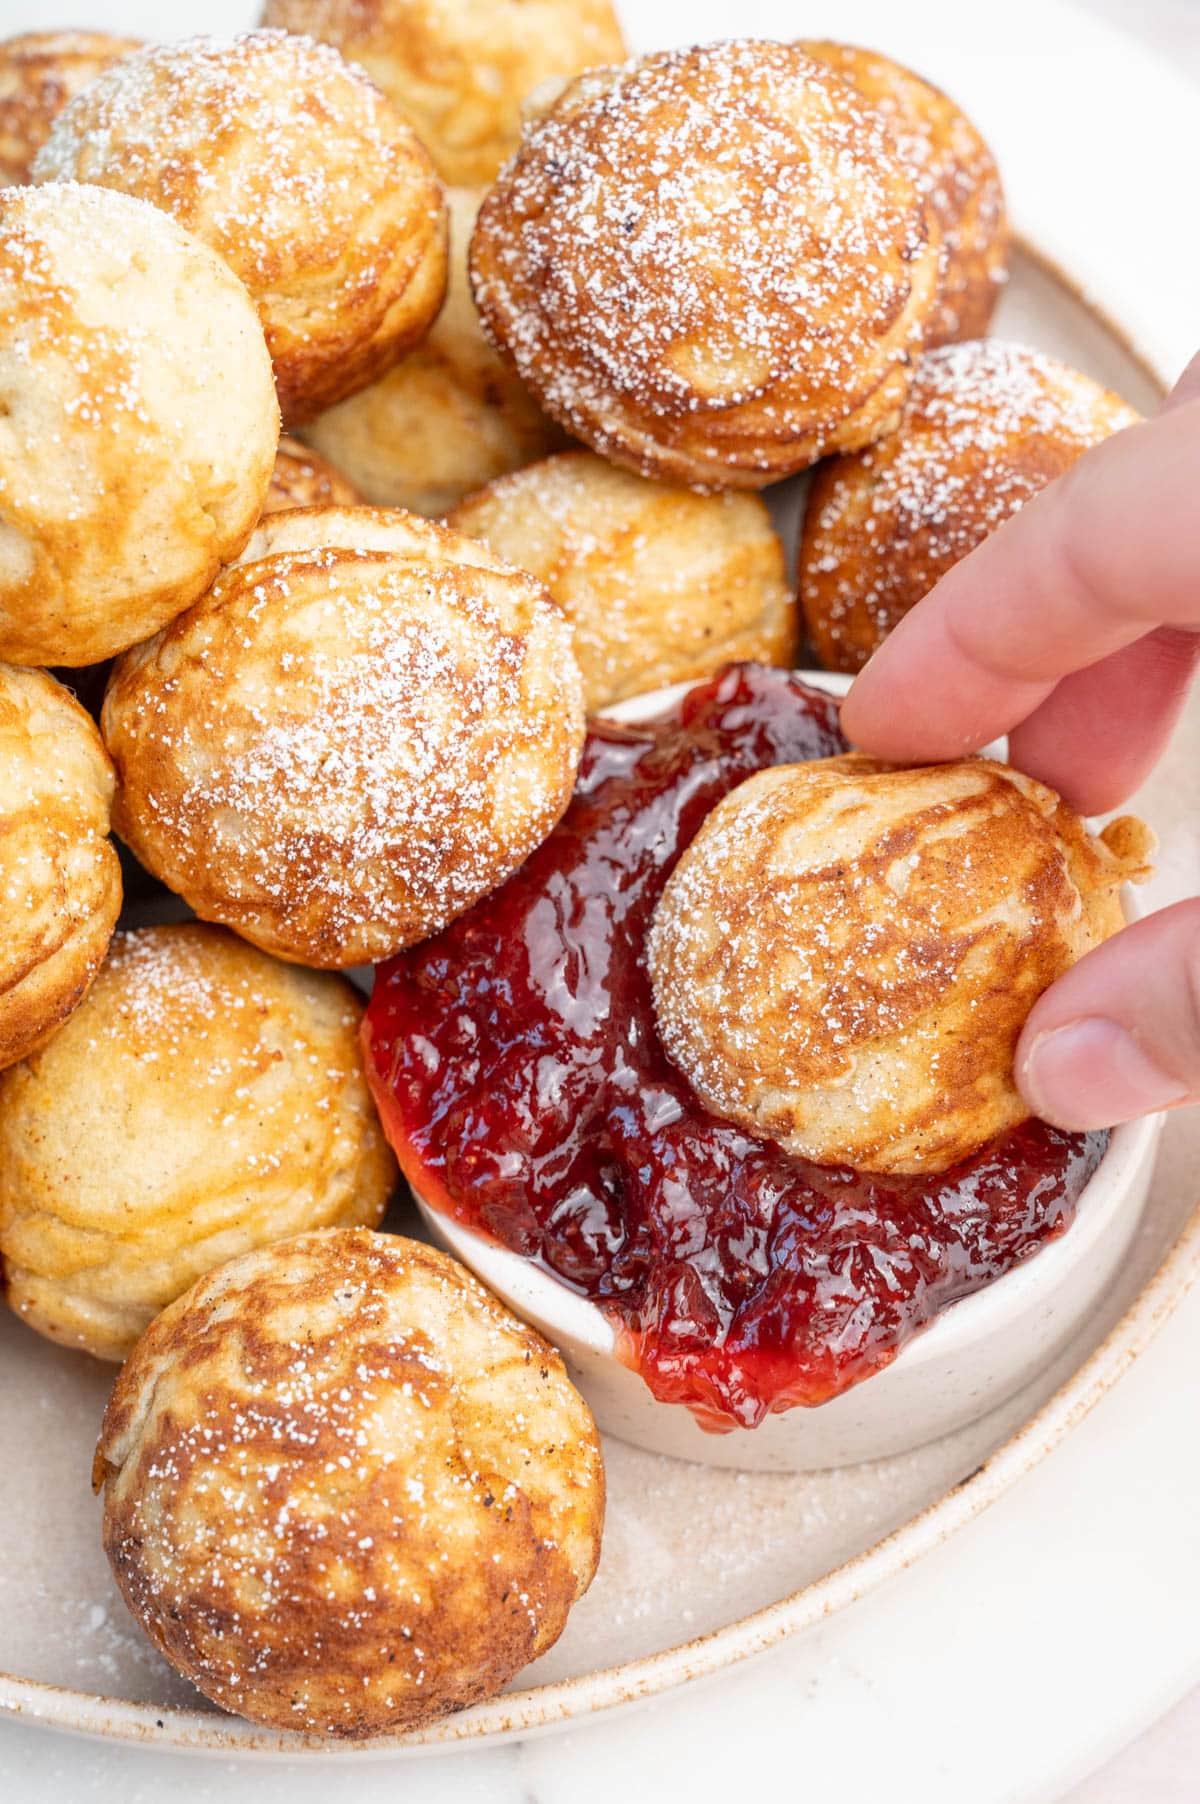 Aebleskiver pancake ball is being dipped in strawberry jam.